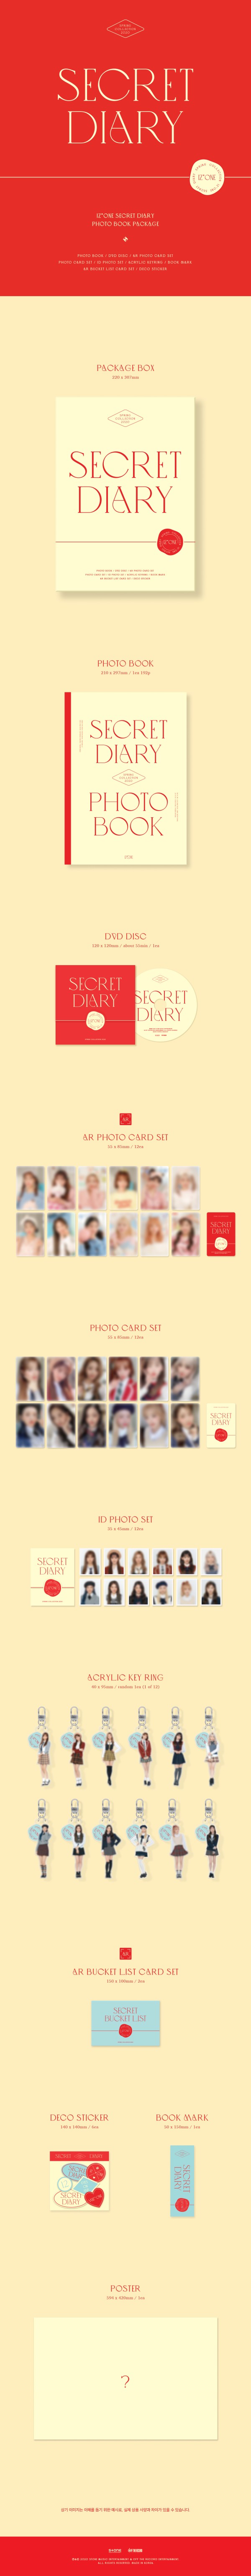 IZ*ONE SPRING COLLECTION [SECRET DIARY](PHOTOBOOK PACKAGE) ［BOOK+DVD+GOODS］ 